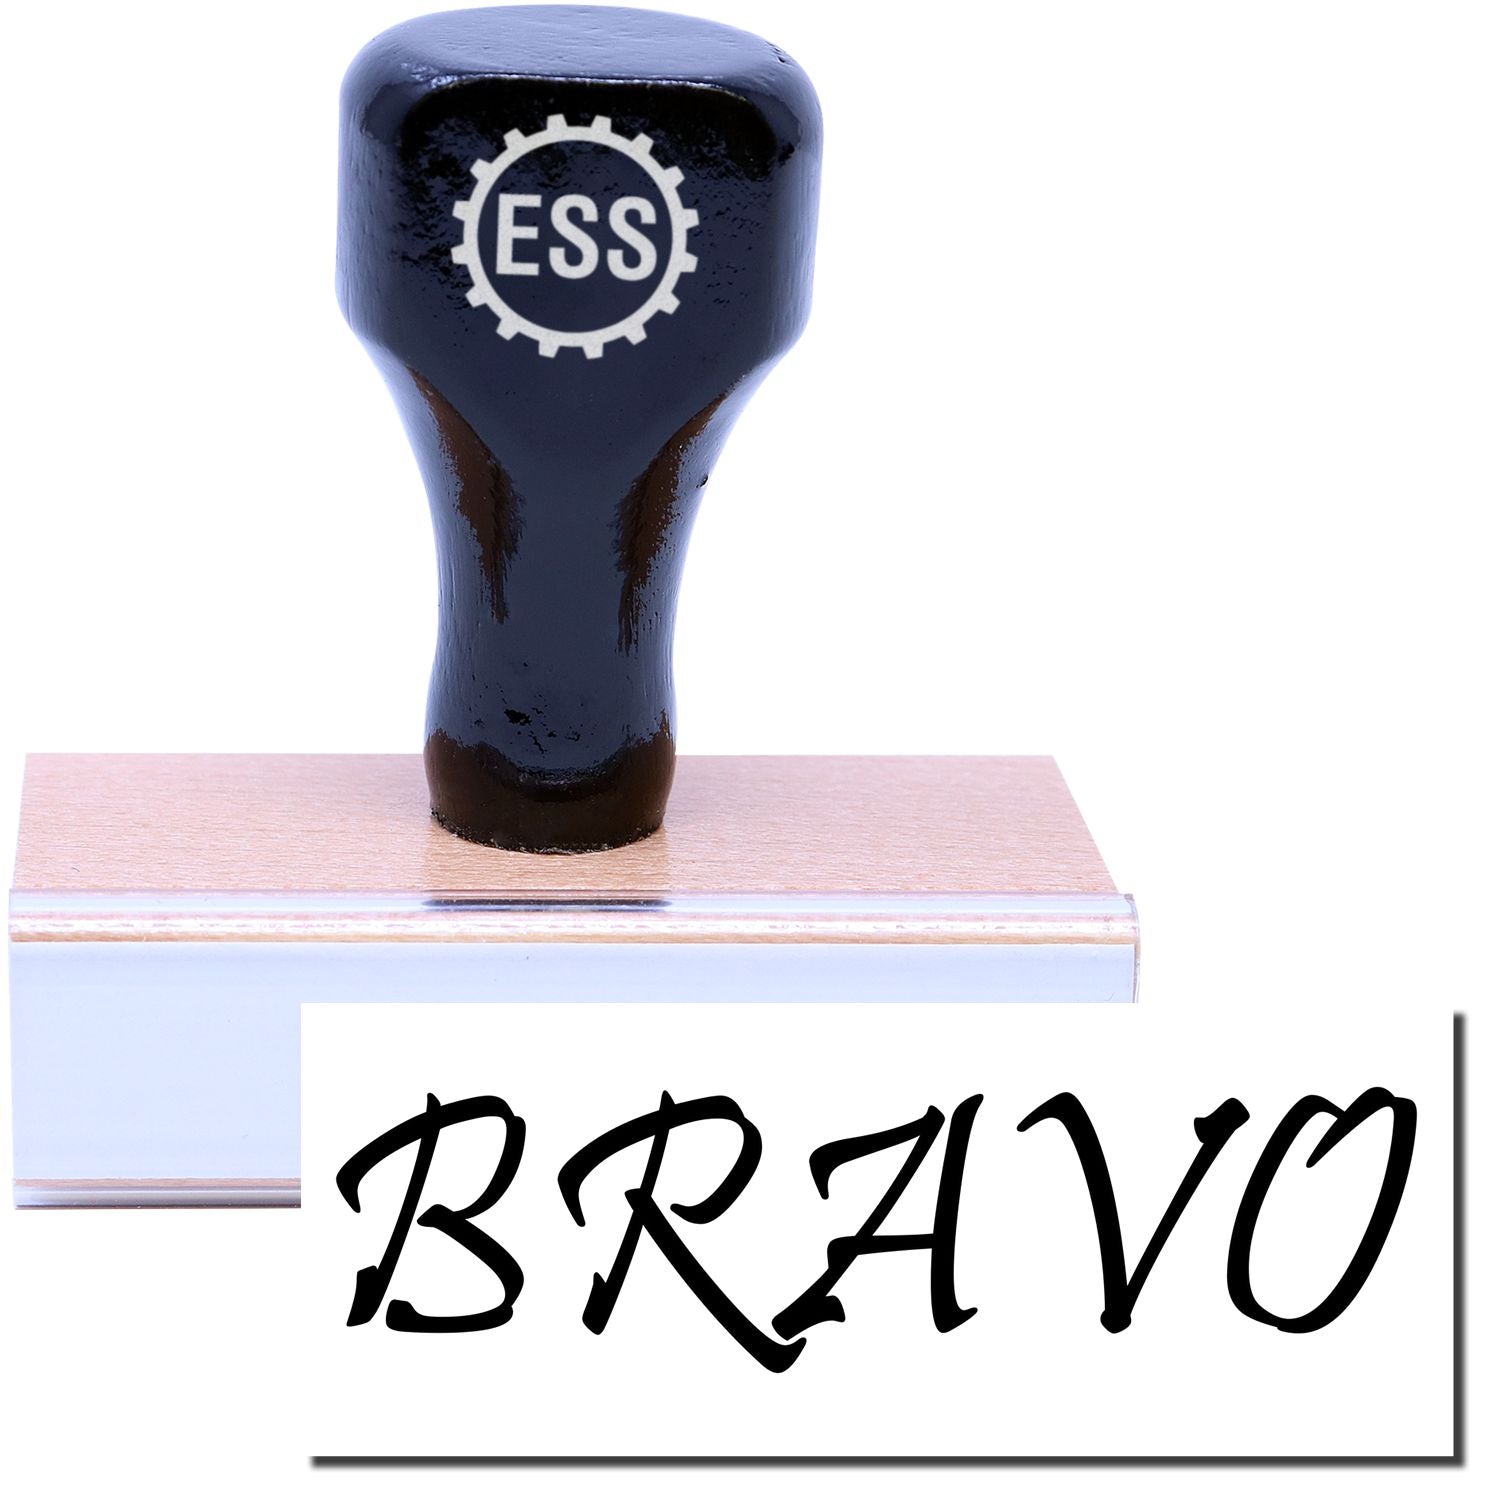 A stock office rubber stamp with a stamped image showing how the text "BRAVO" is displayed after stamping.